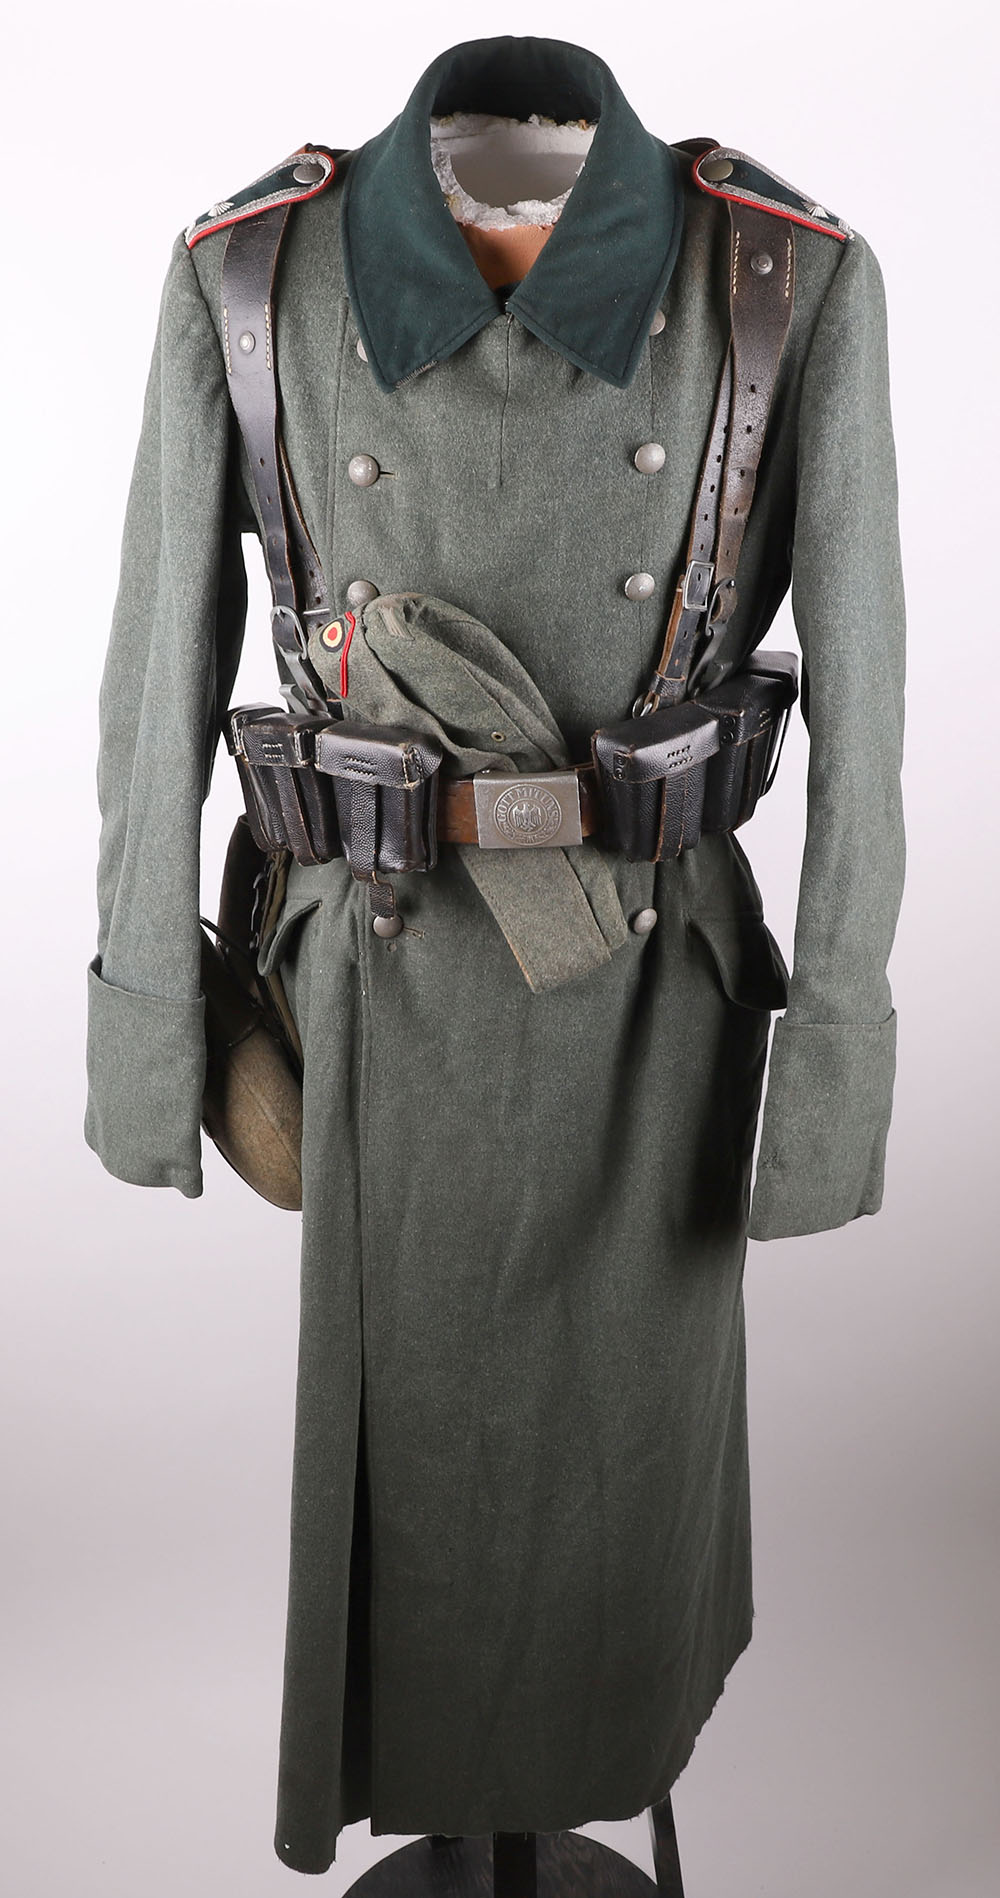 WW2 German Army Greatcoat, Overseas Cap and Equipment Set - Image 22 of 23